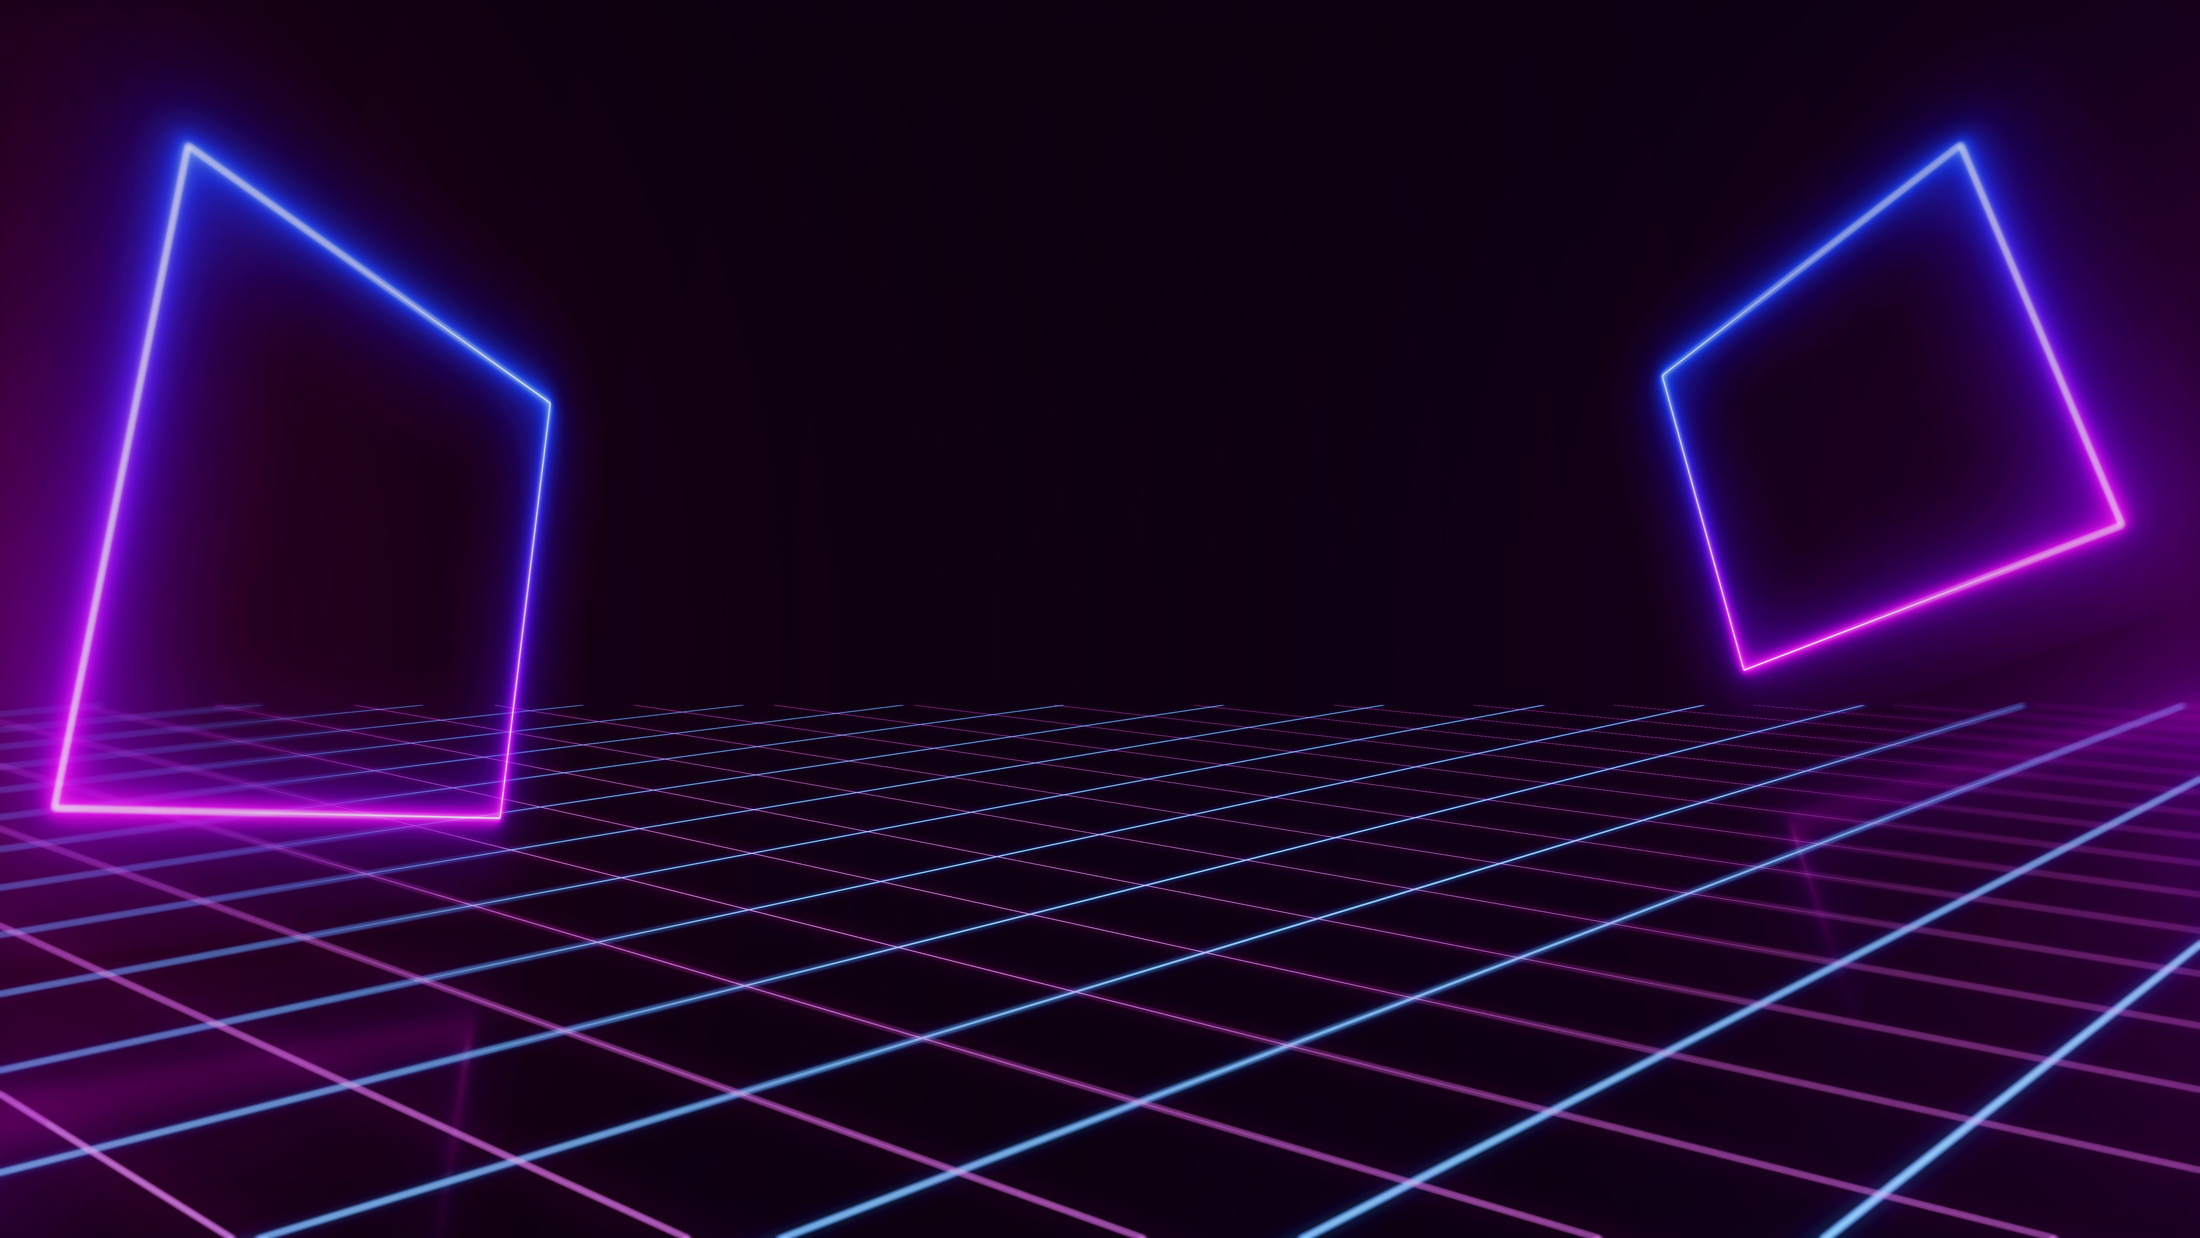 Retro style 80s video game background.